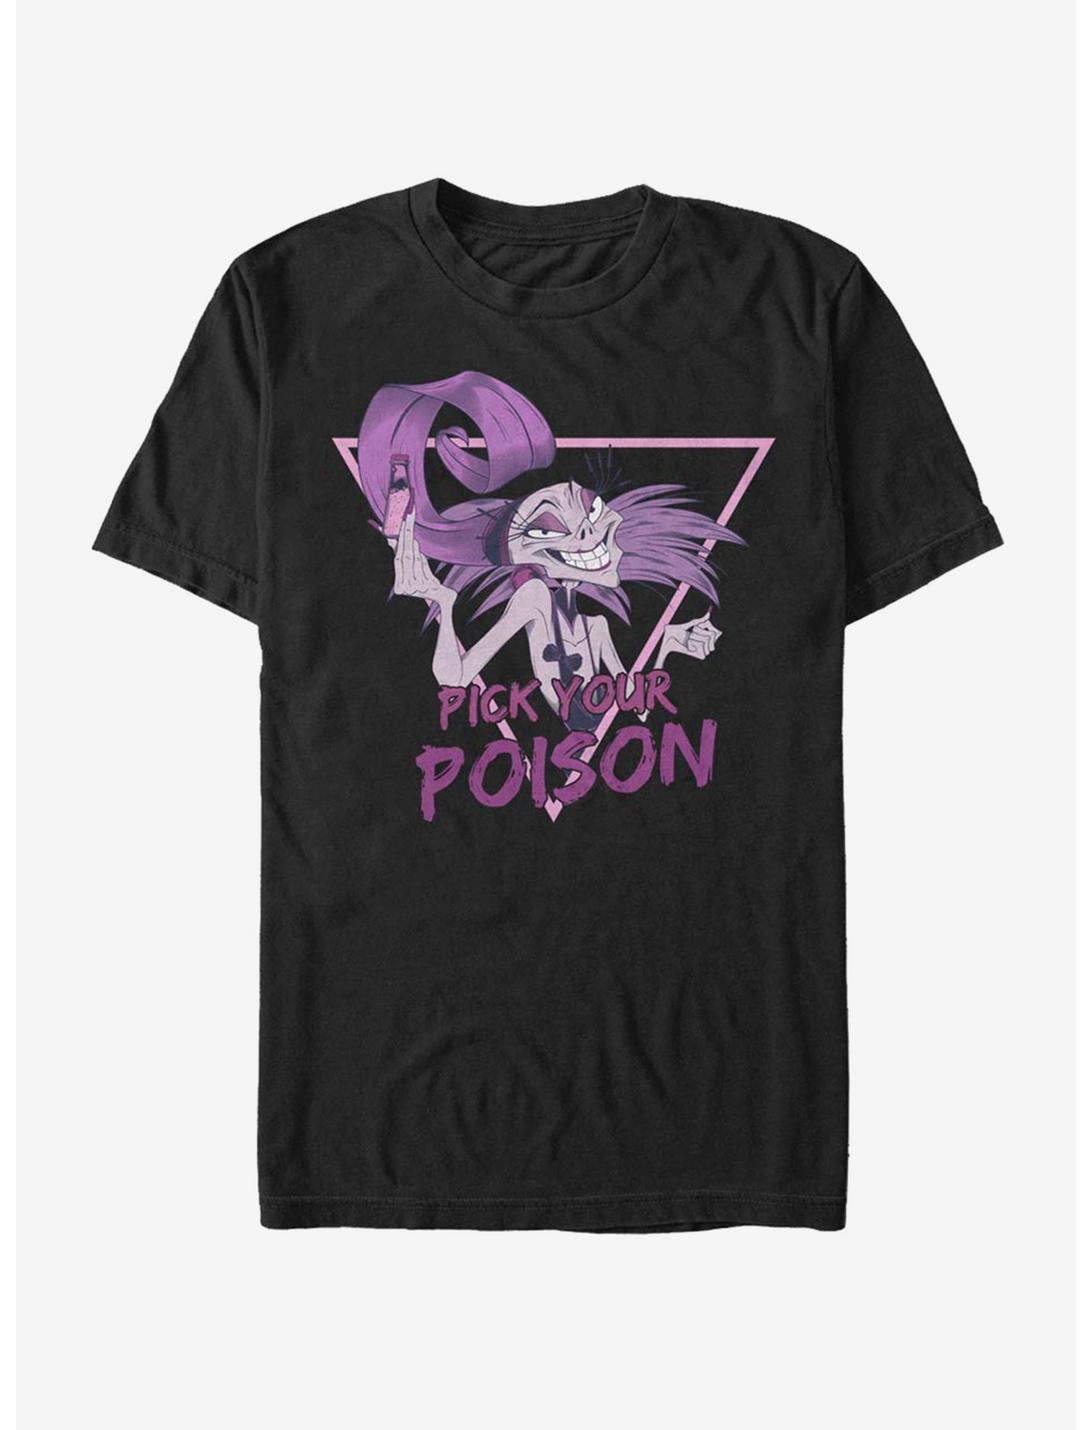 Disney The Emperor's New Groove Pick Your Poison T-Shirt, BLACK, hi-res